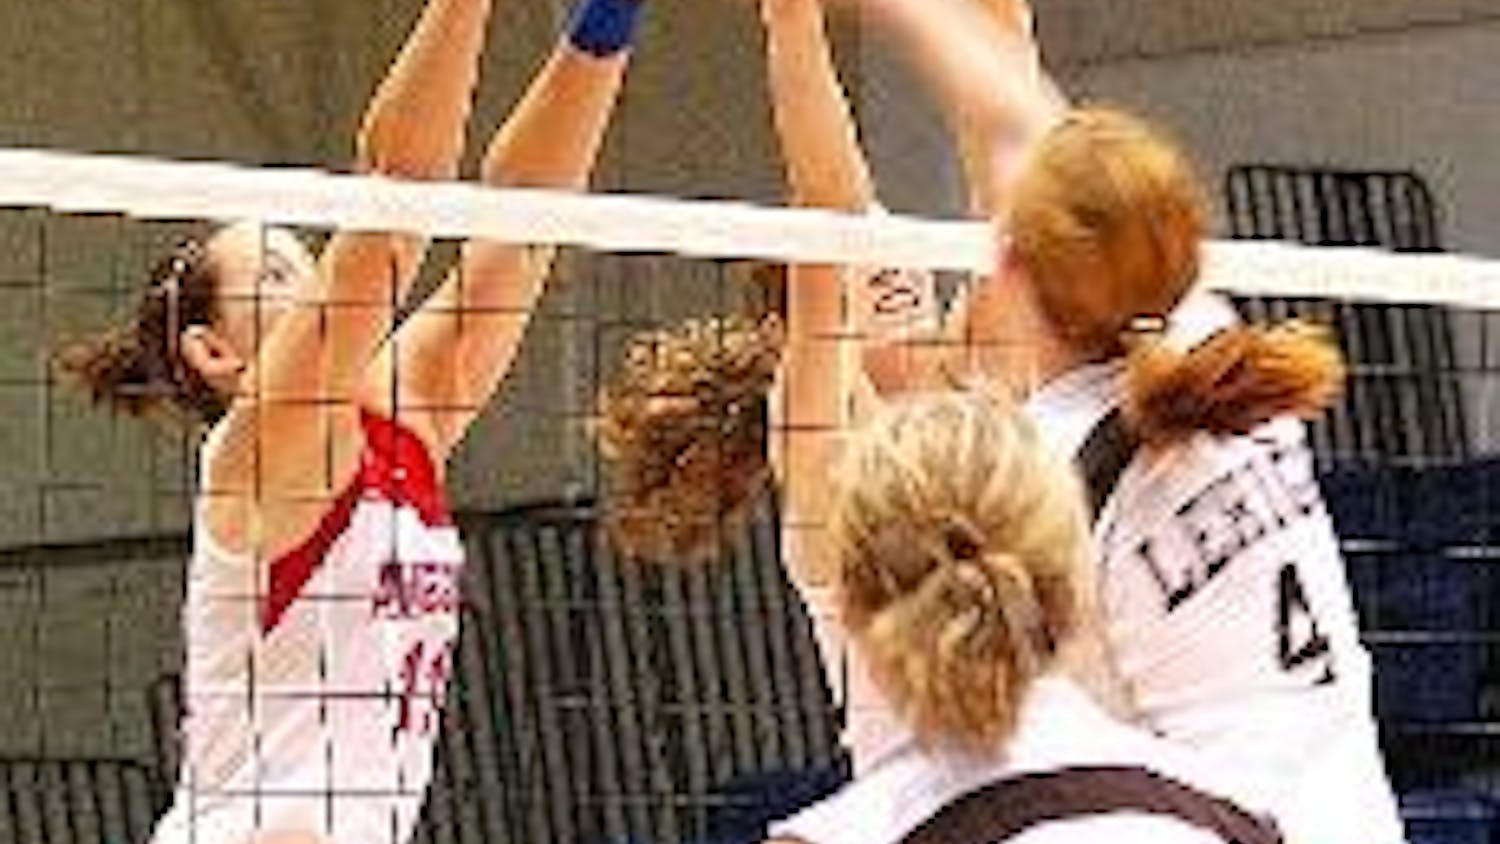 HANDS UP - Senior setter Christina Nash (No. 11) and junior middle blocker Claire Recht team up to block their Lehigh opponents in Saturday's 3-0 victory over the Mountain Hawks.  The Eagles have won five straight matches and 15 consecutive sets during th